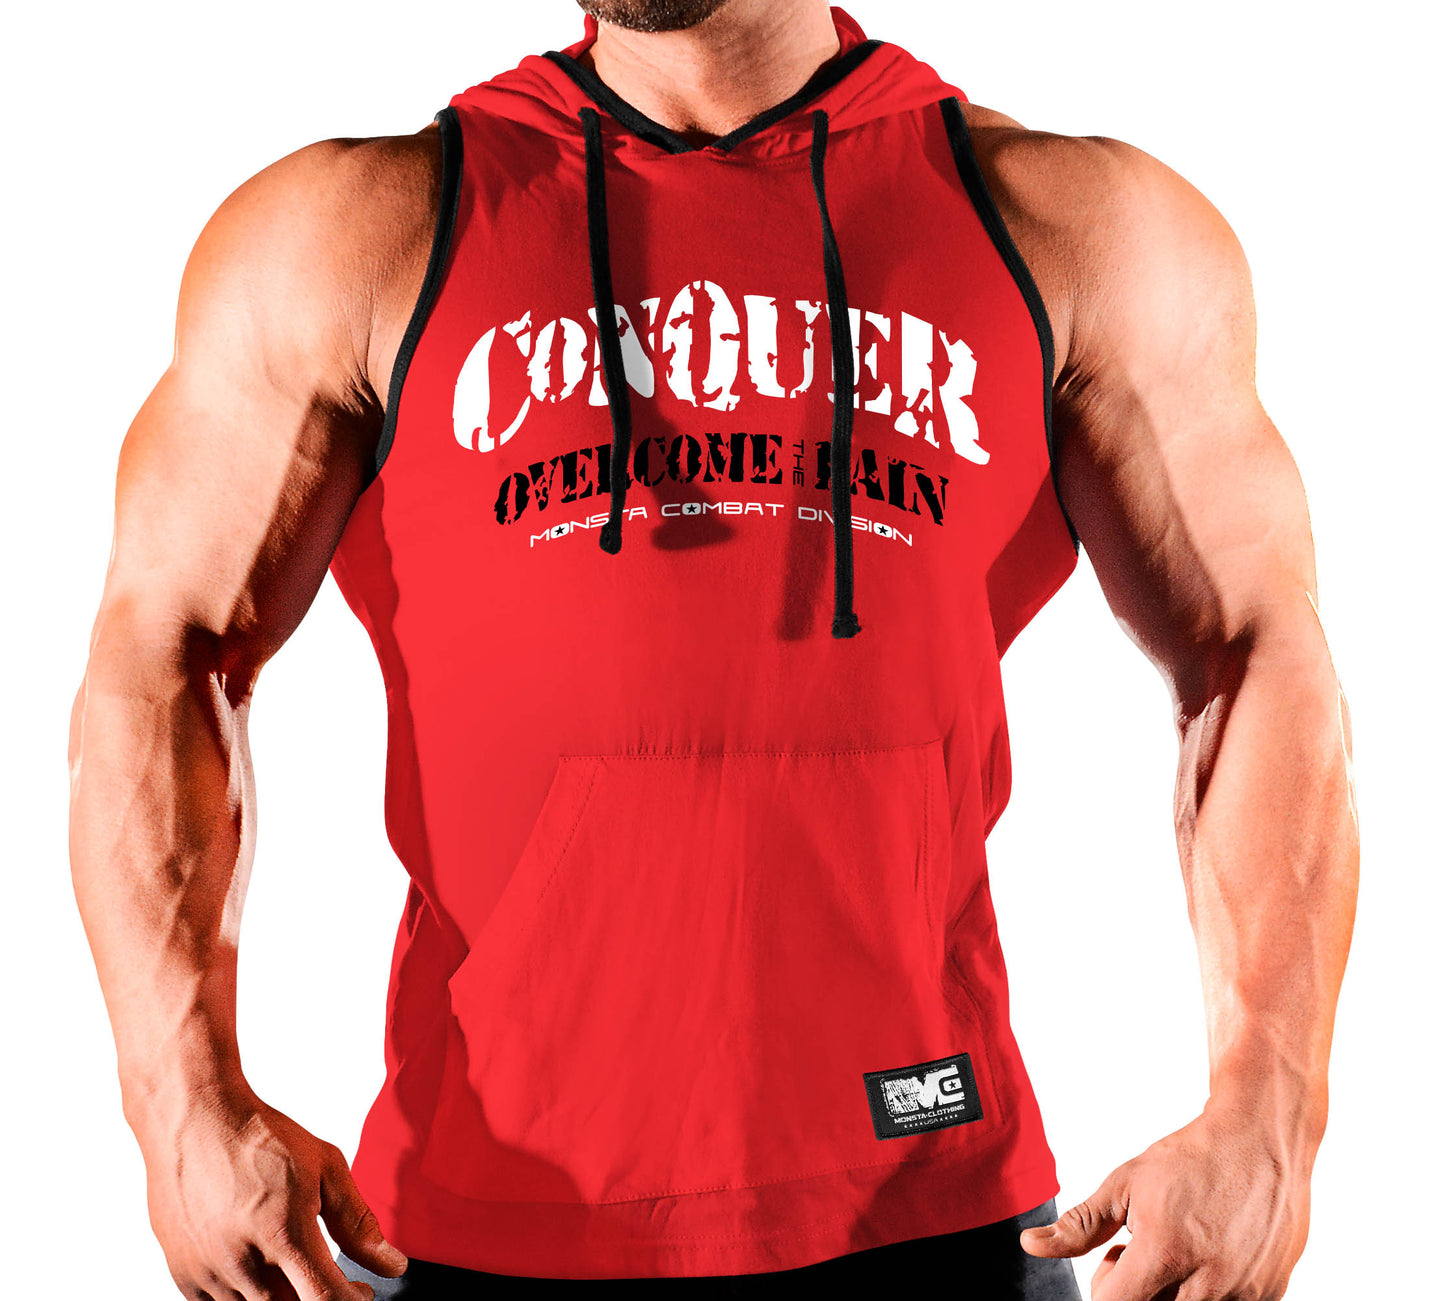 CONQUER-Overcome the Pain-137: WT-BK